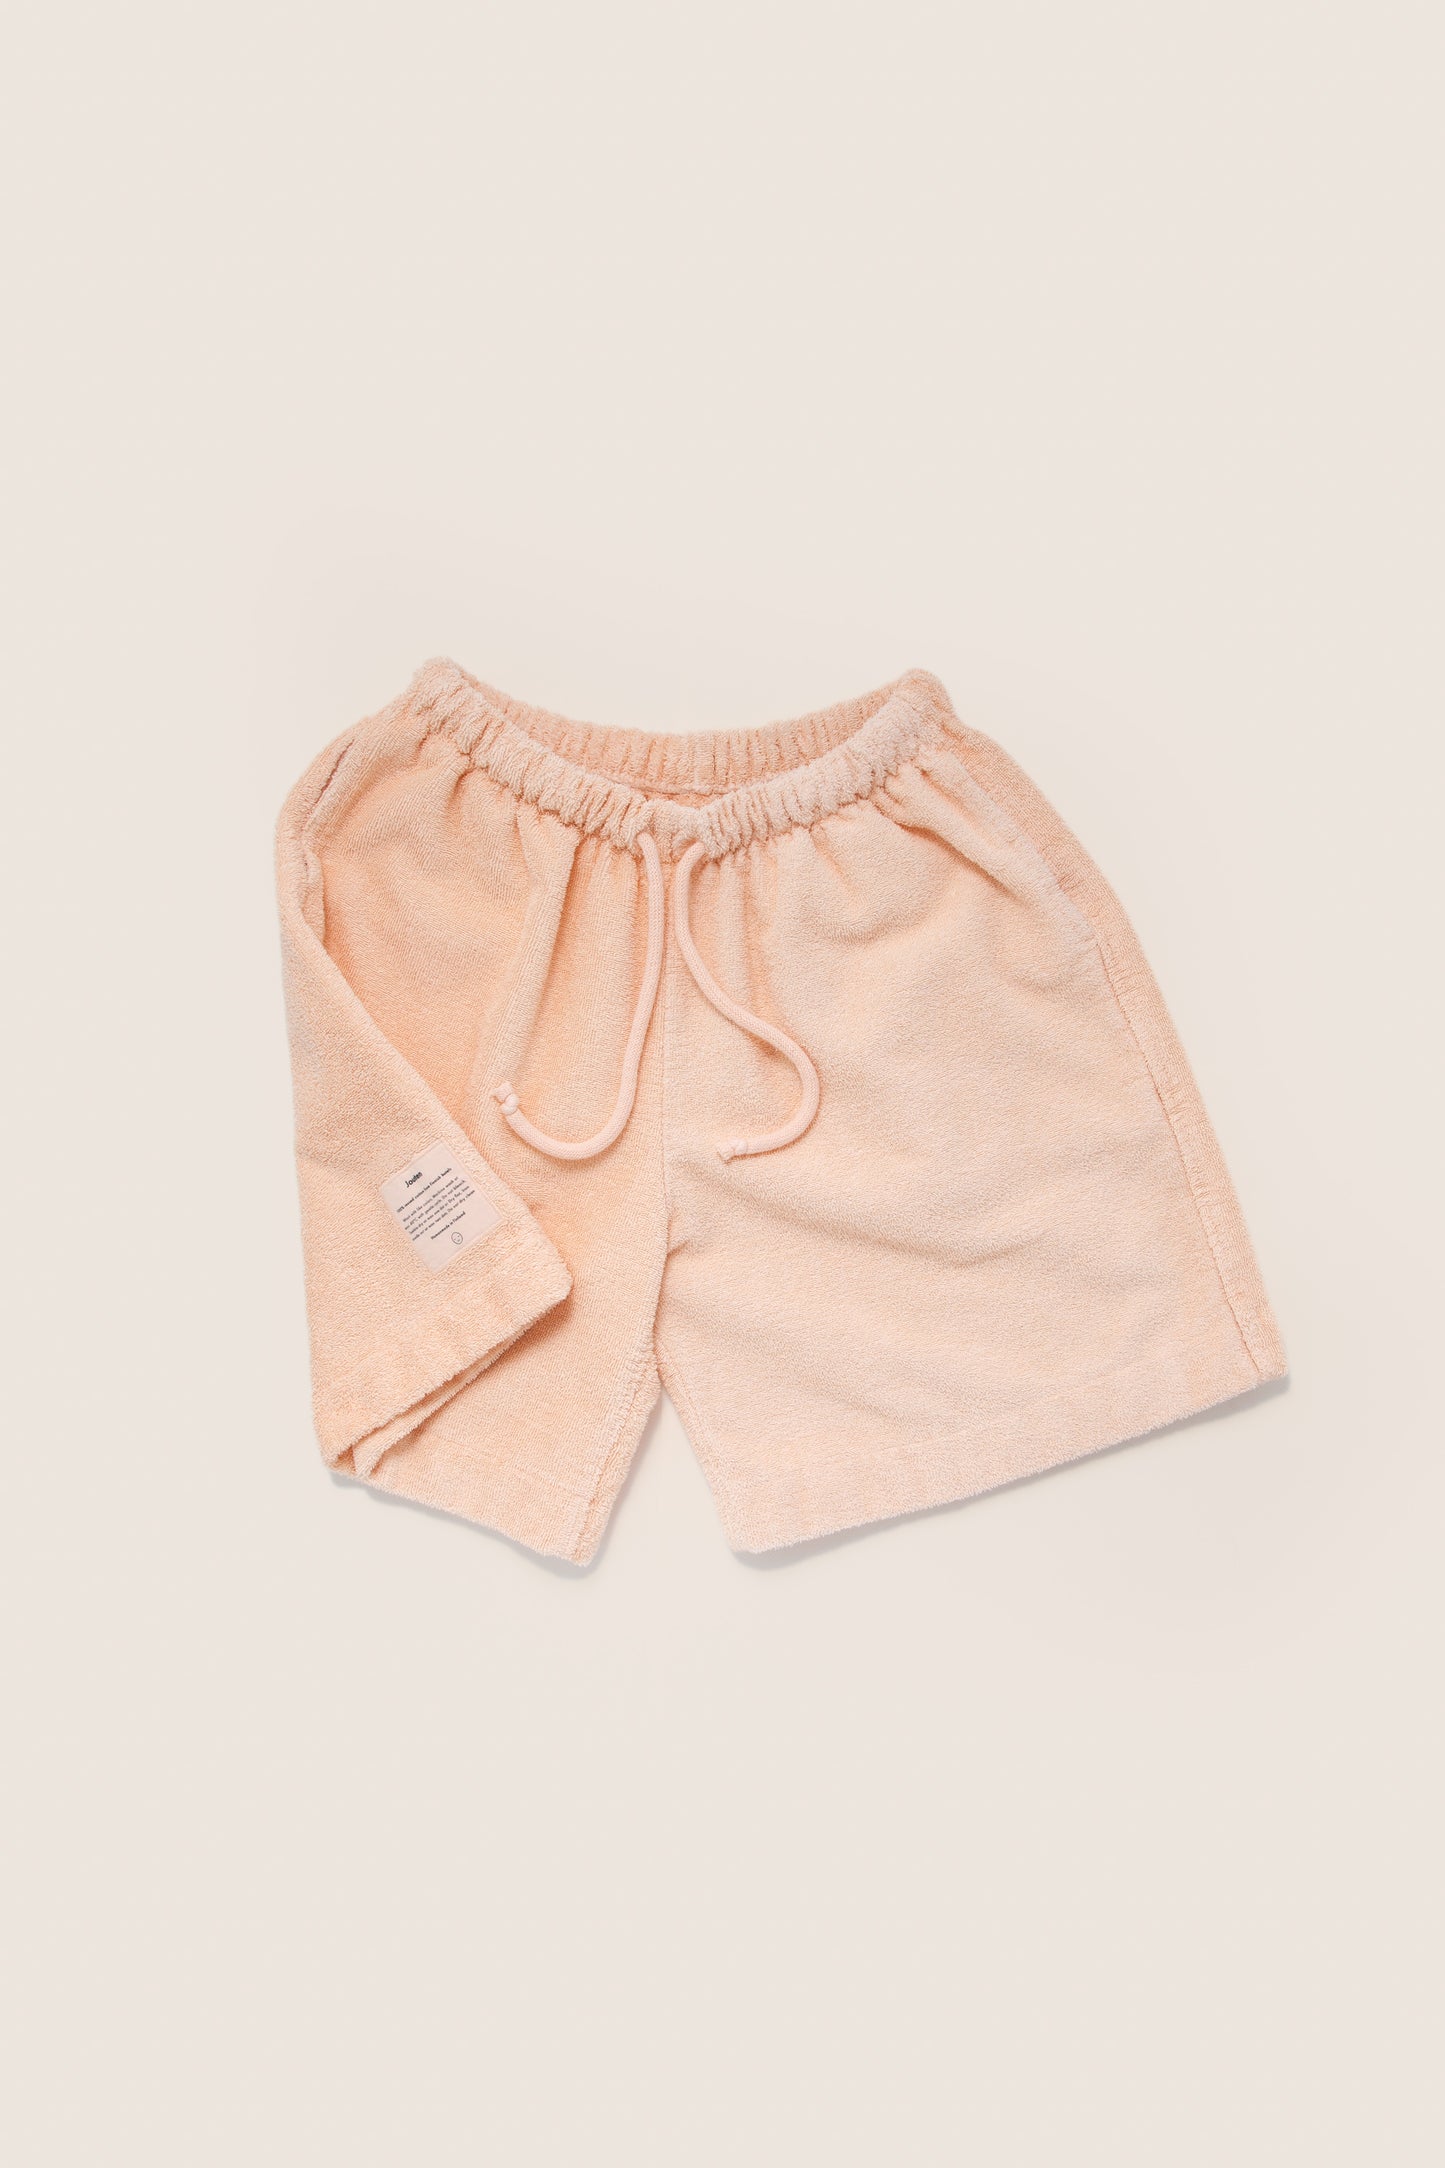 Unisex Terry Basketball Shorts in Peach